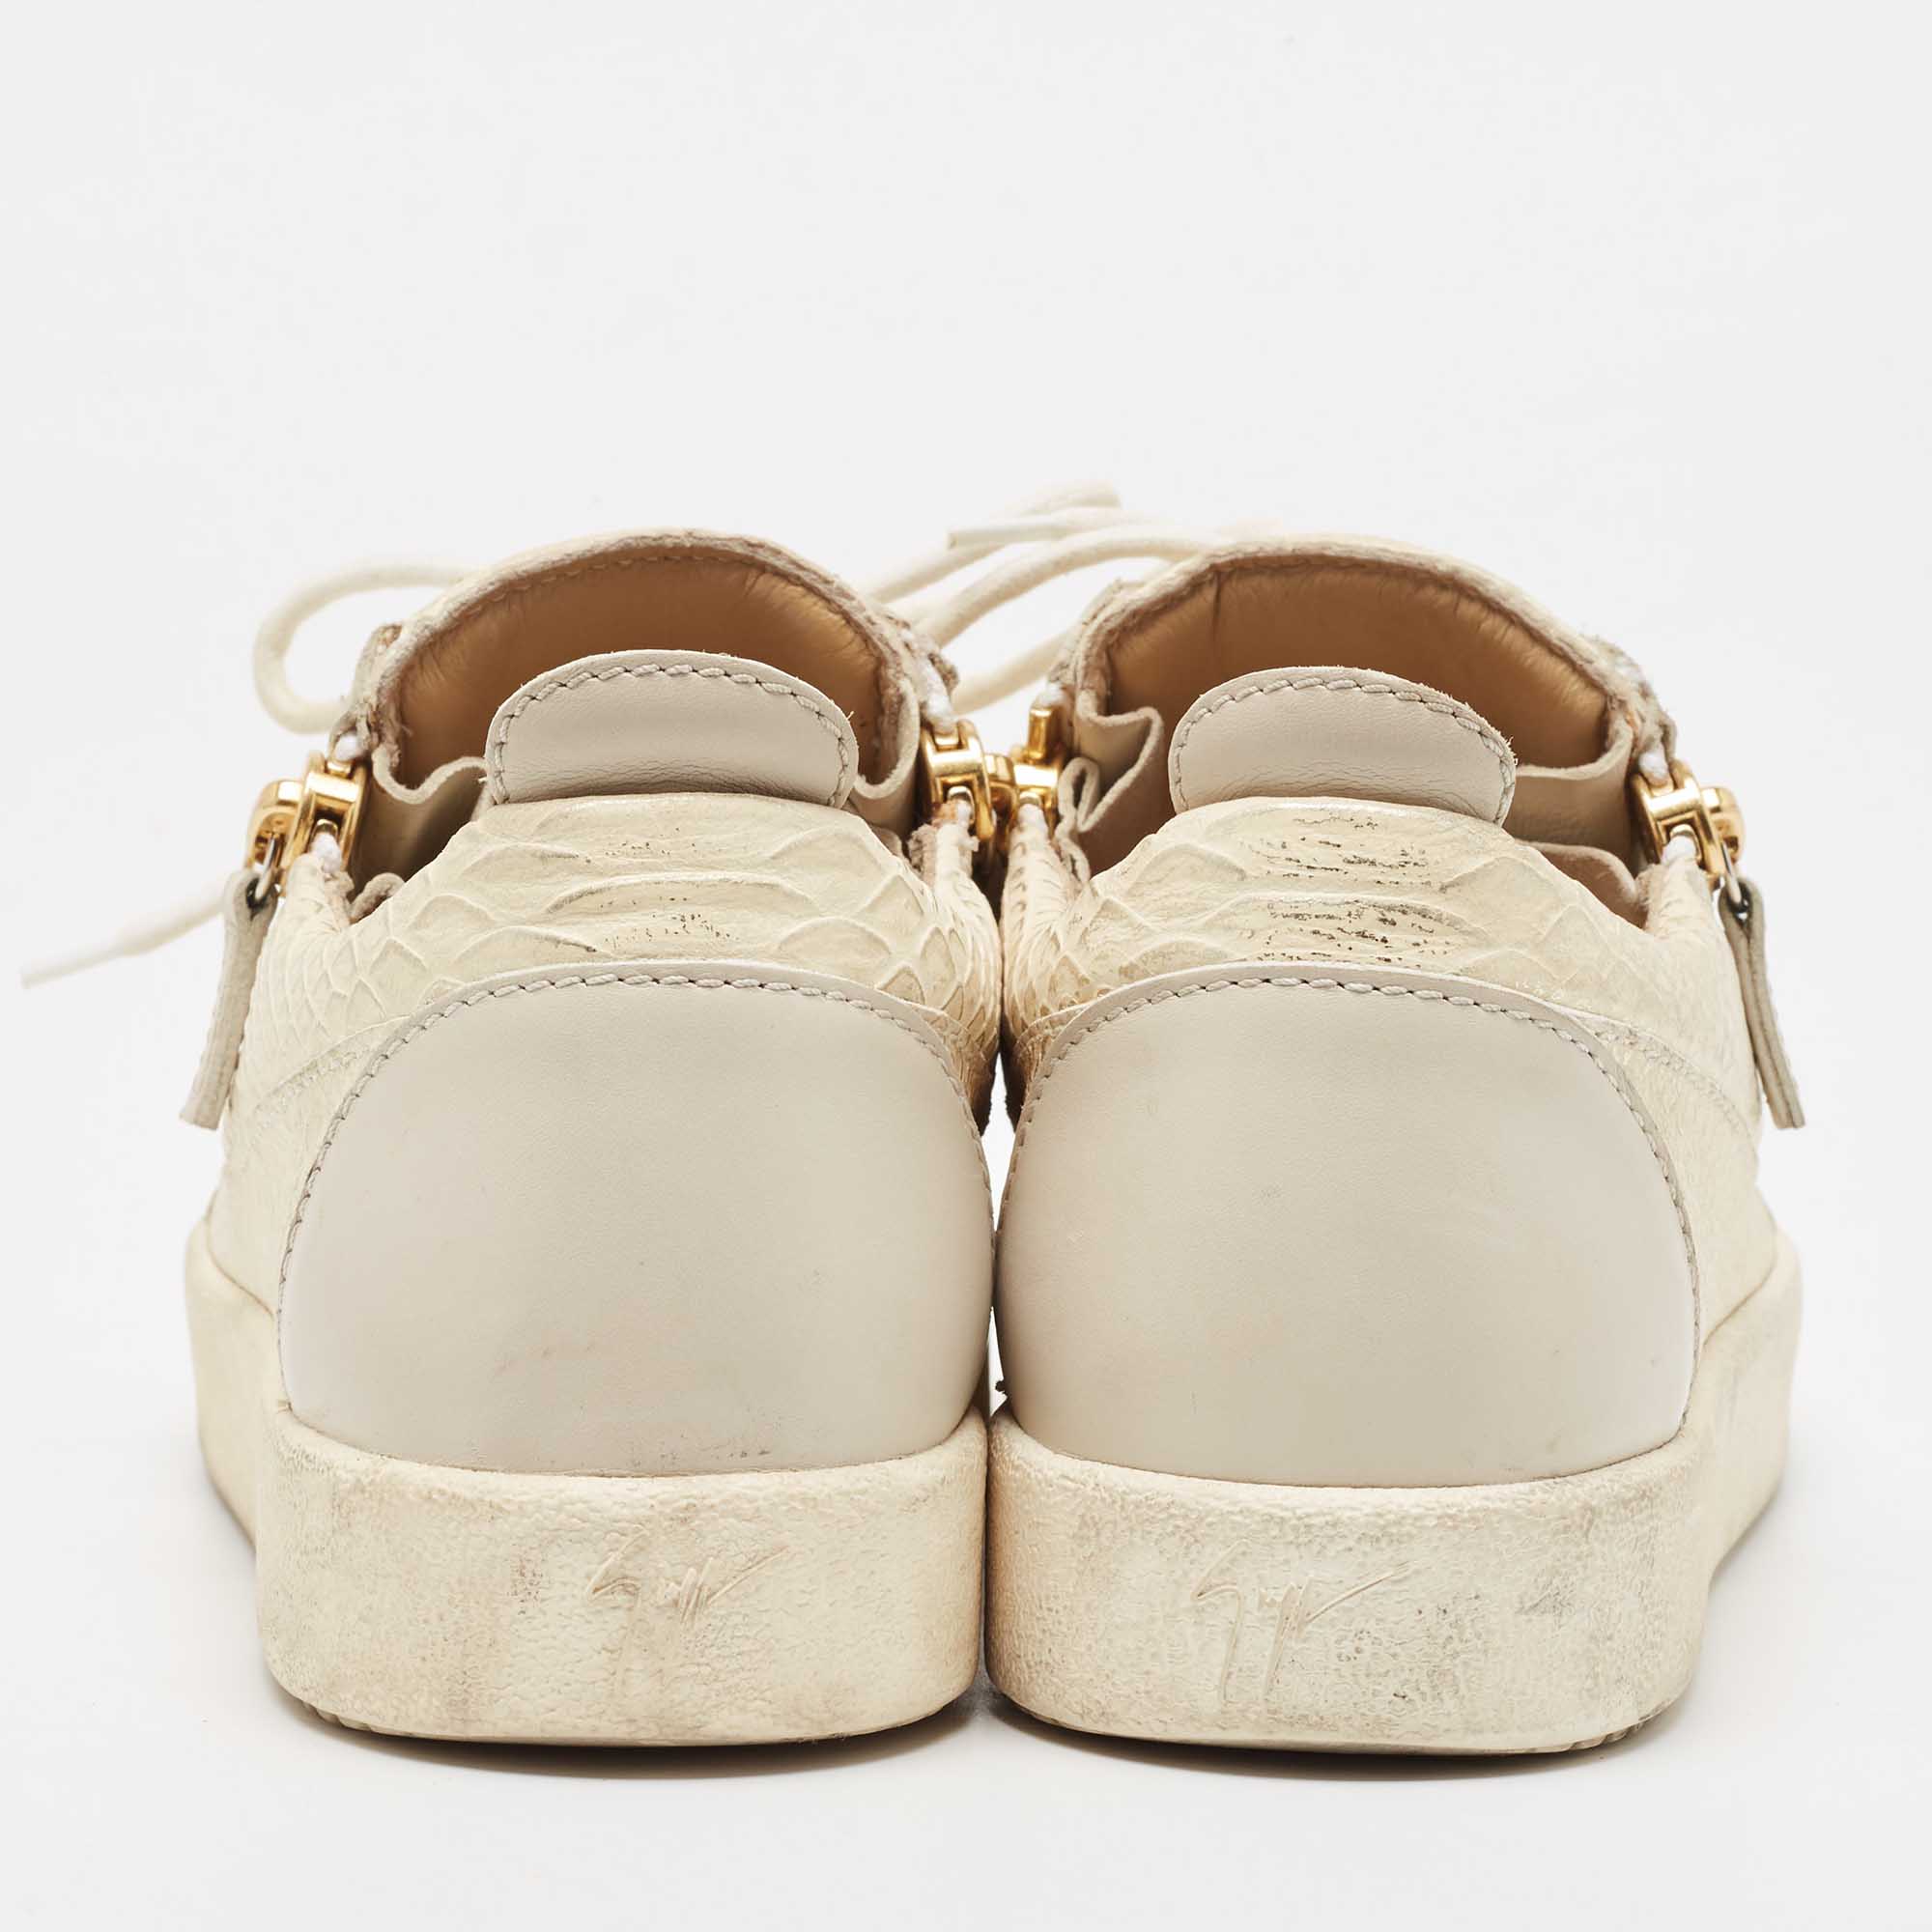 Giuseppe Zanotti Cream/Grey Embossed Python And Leather Frankie Sneakers Size 38.5